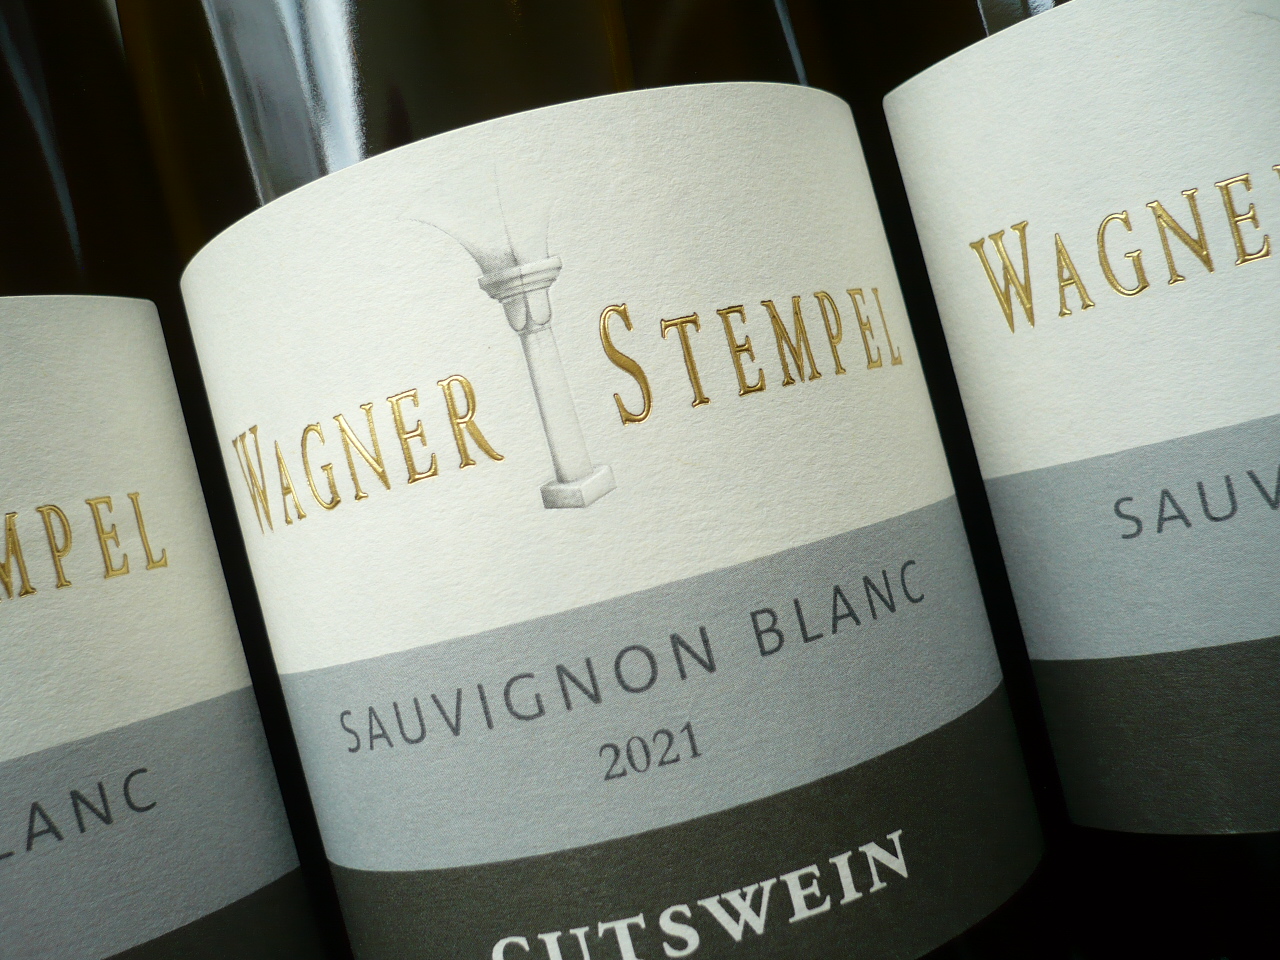 find+buy: find+buy The wein.plus | of our wines wein.plus members